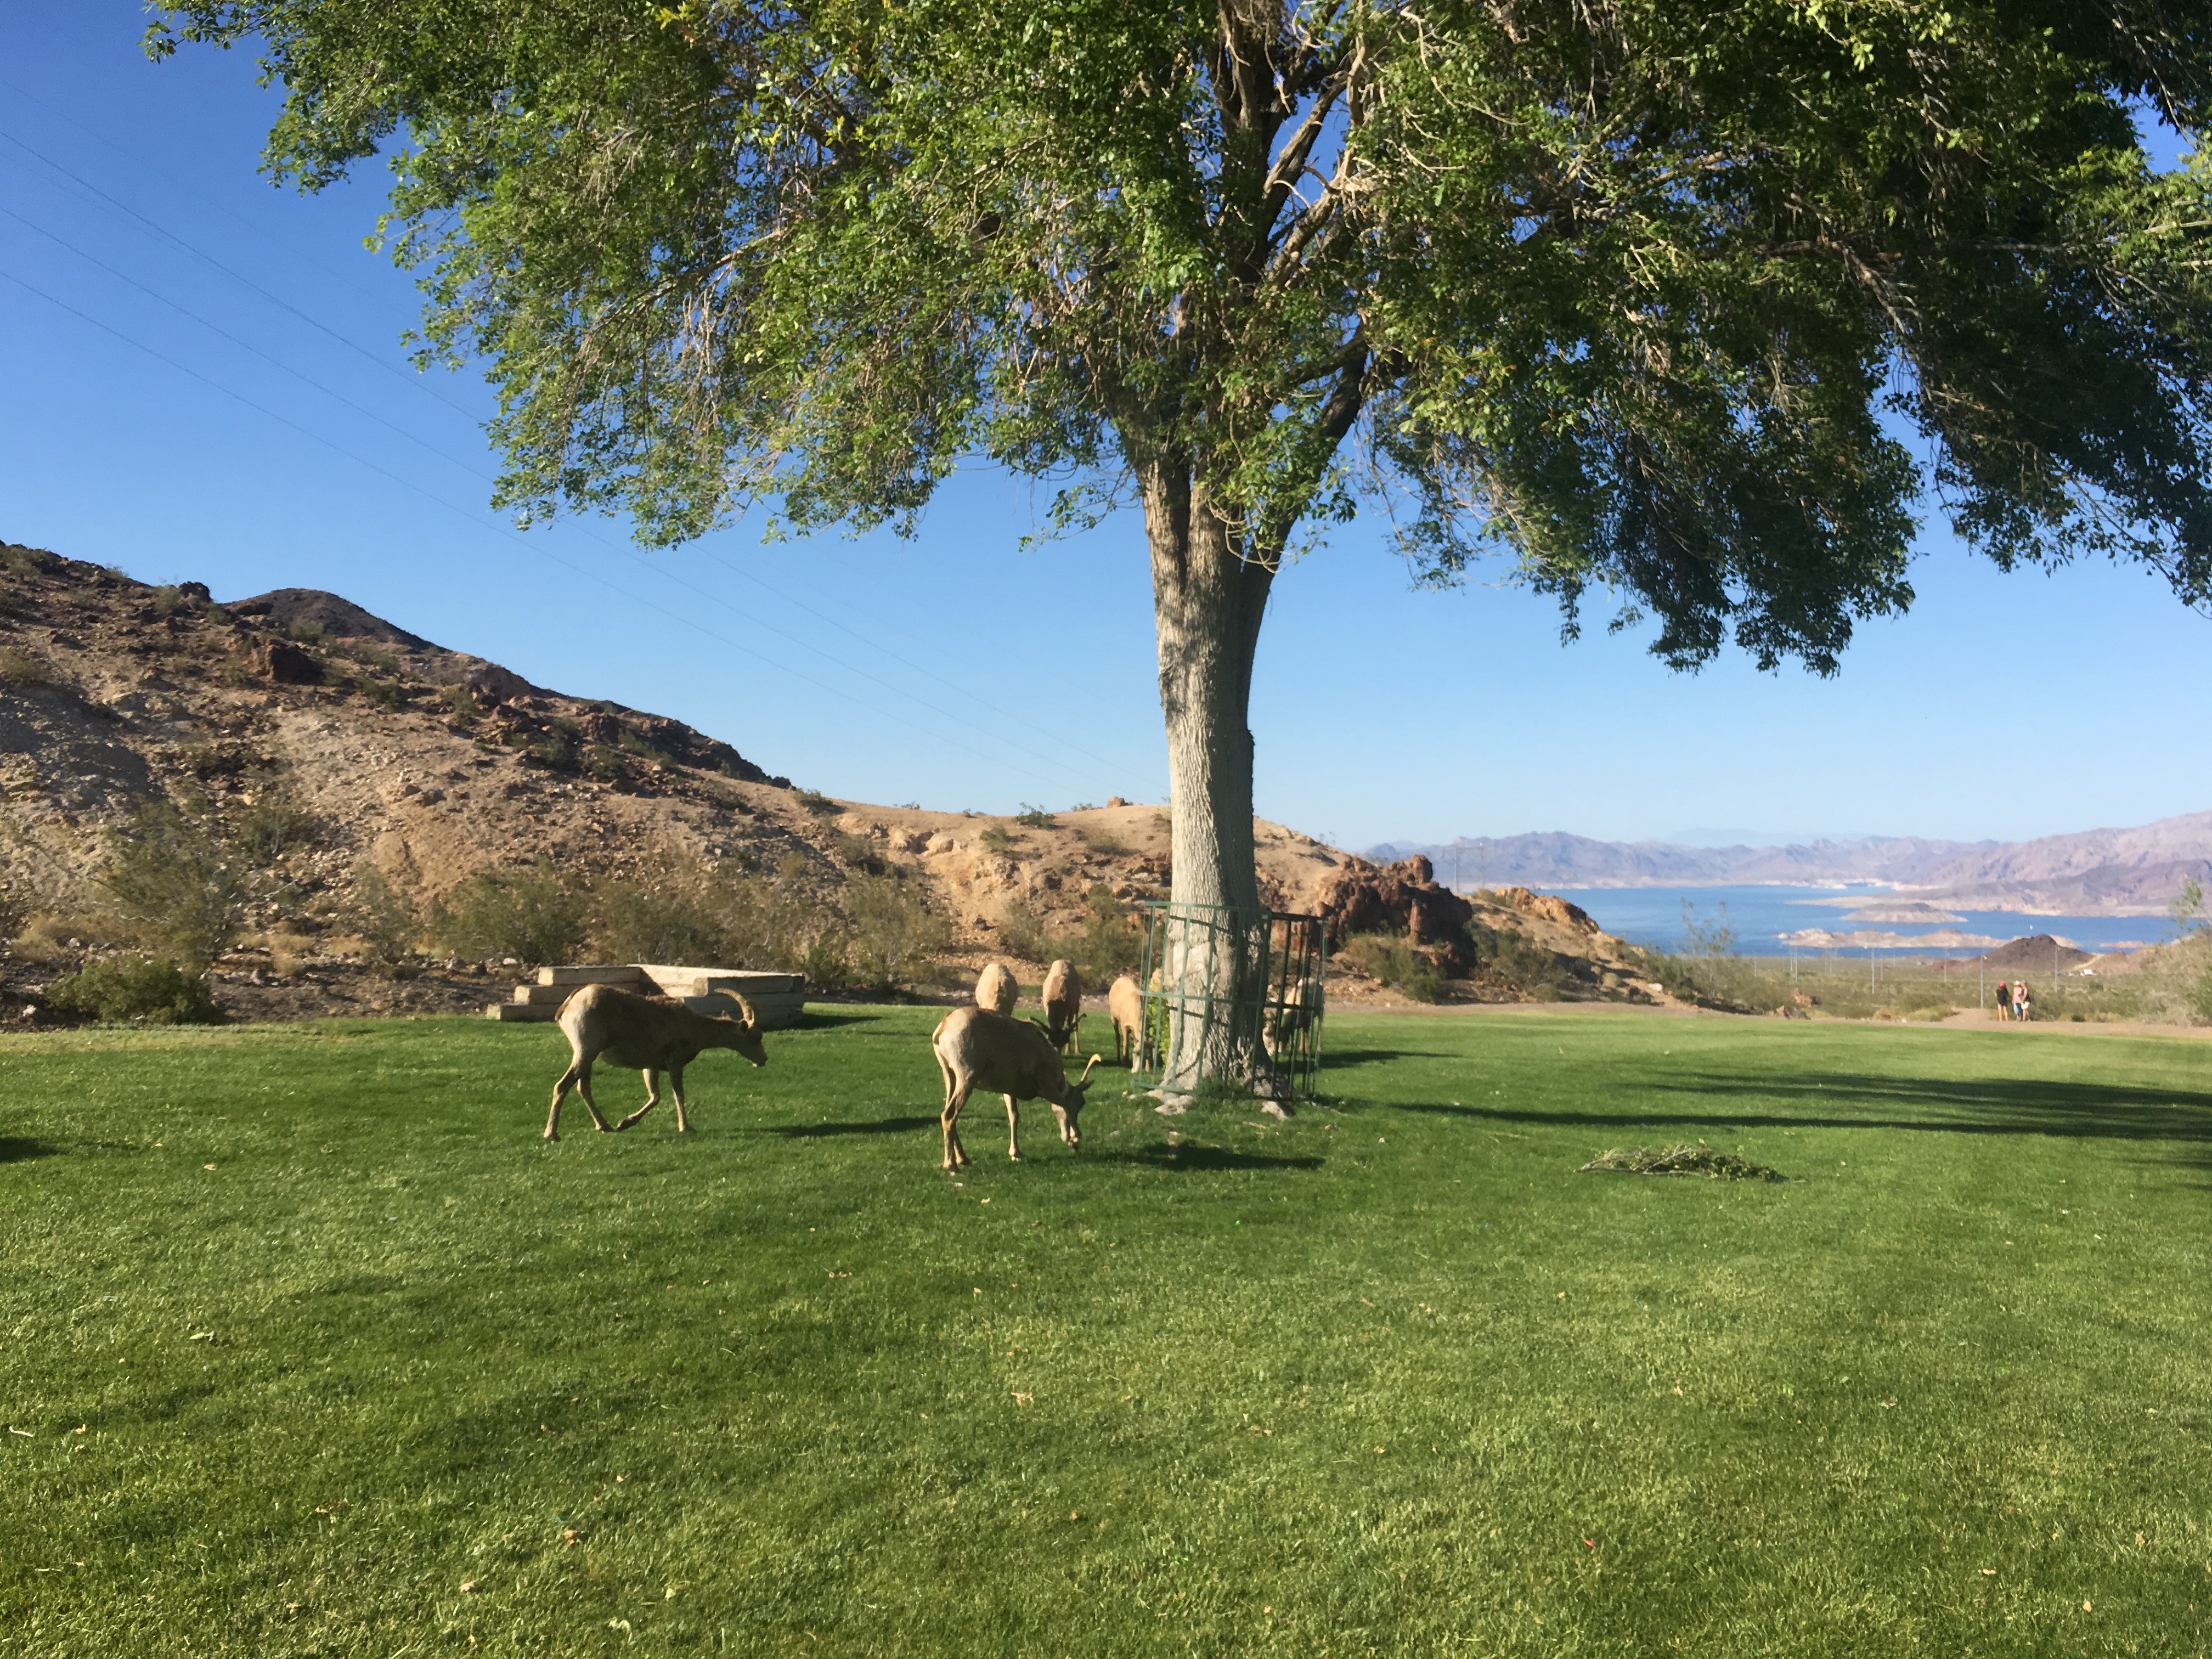 Big horned sheep standing near a tree and Lake Mead